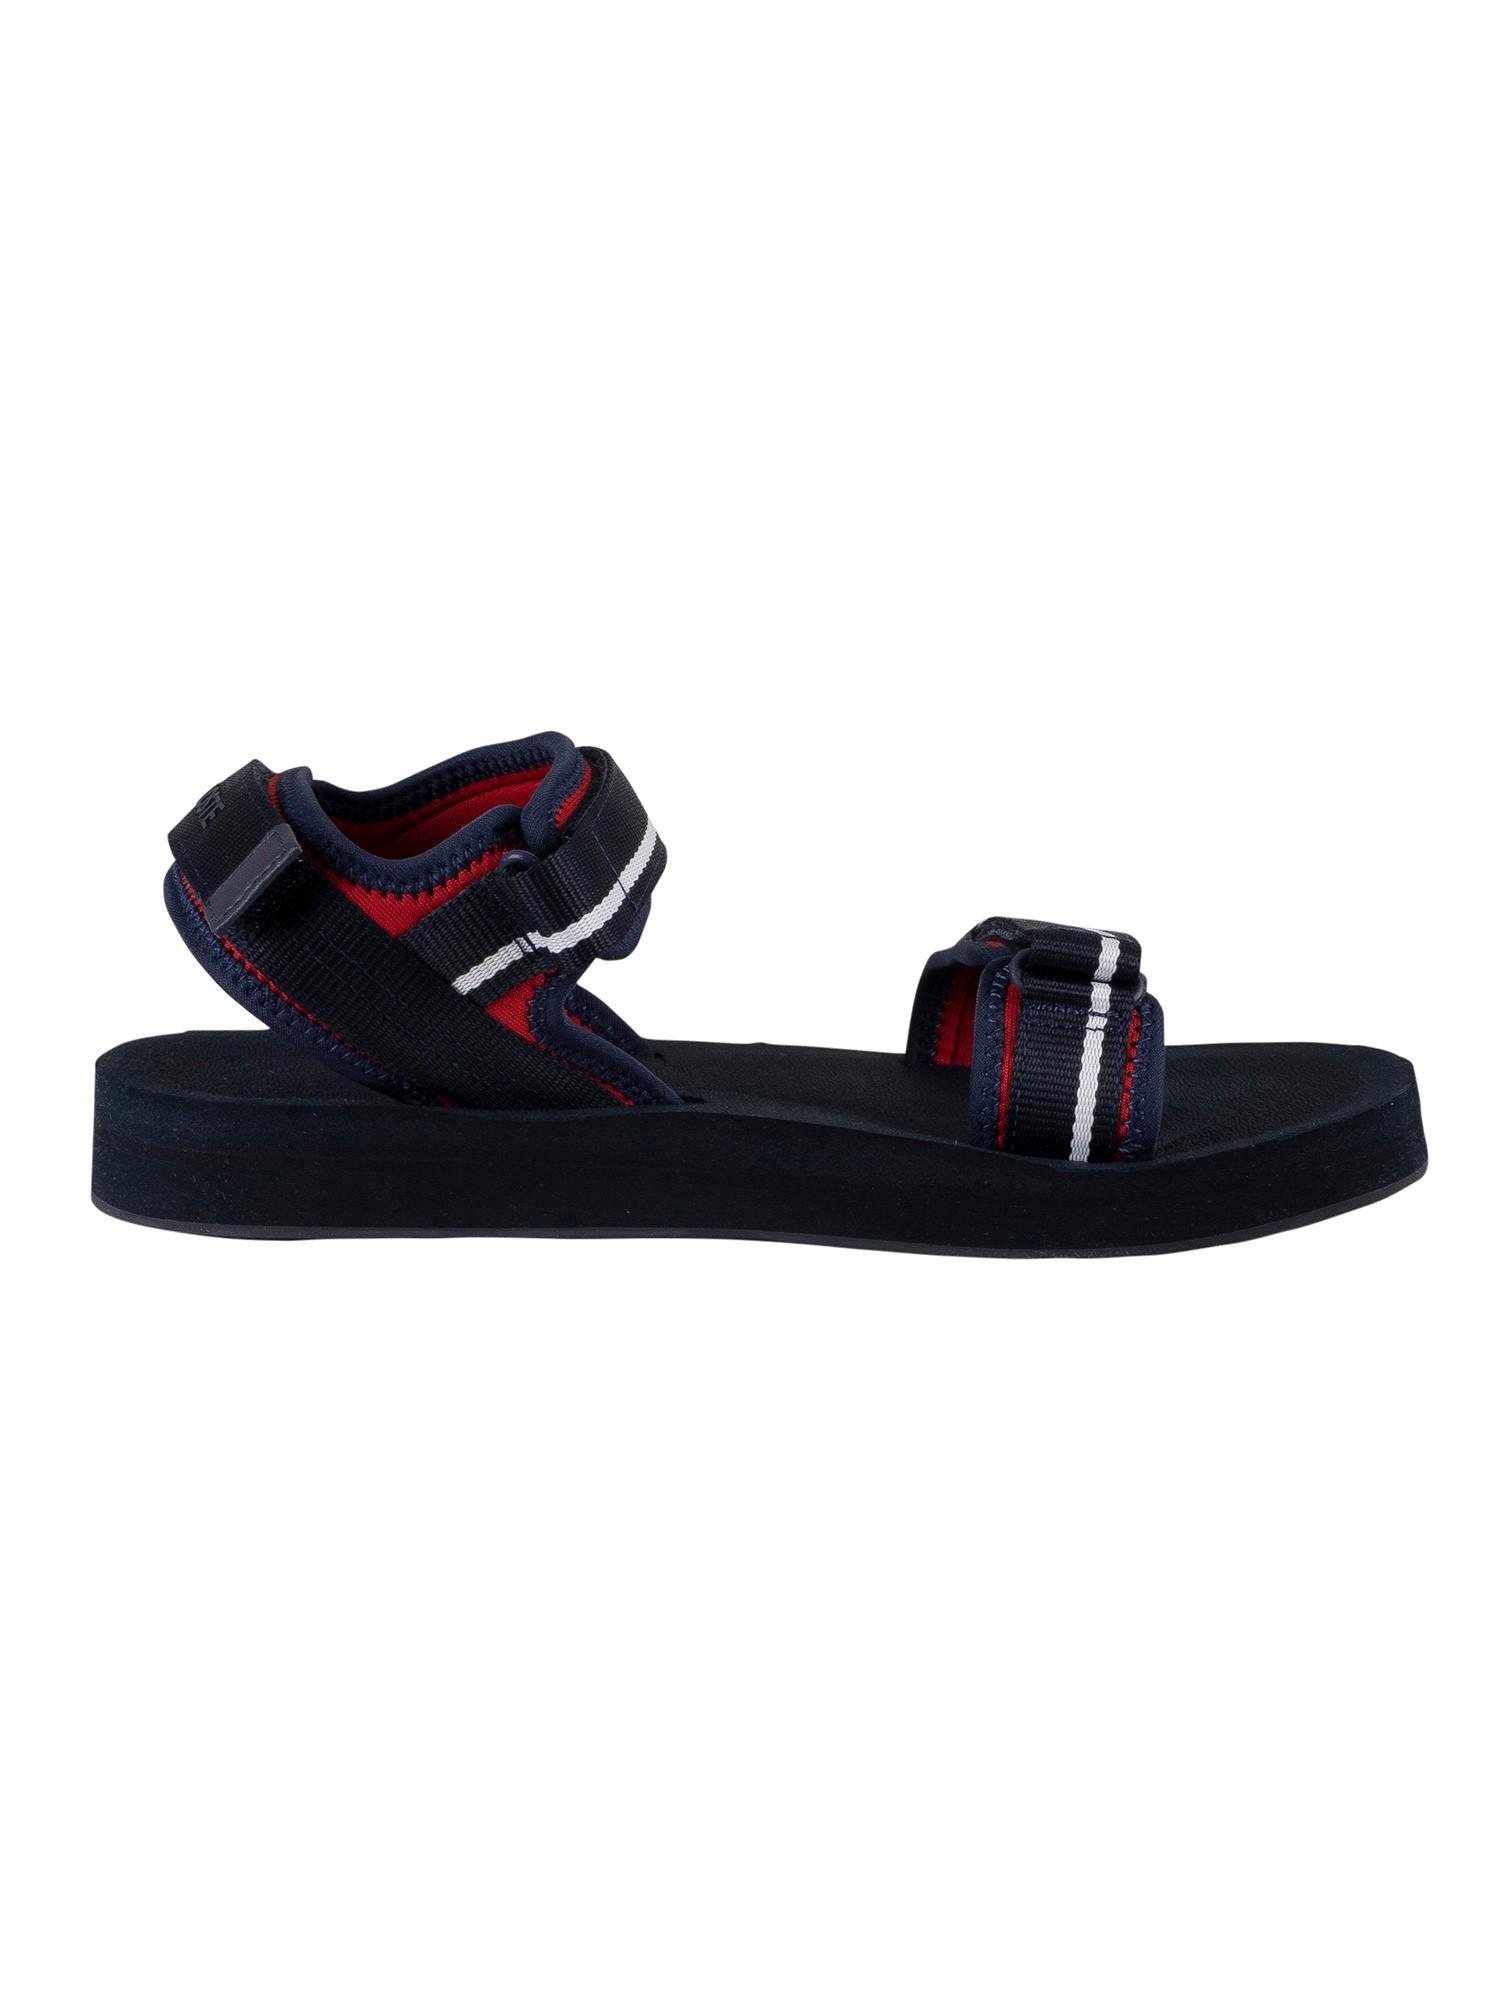 Lacoste Leather Suruga 120 1 Cma Sandals in Navy/Red/White (Blue) for ...